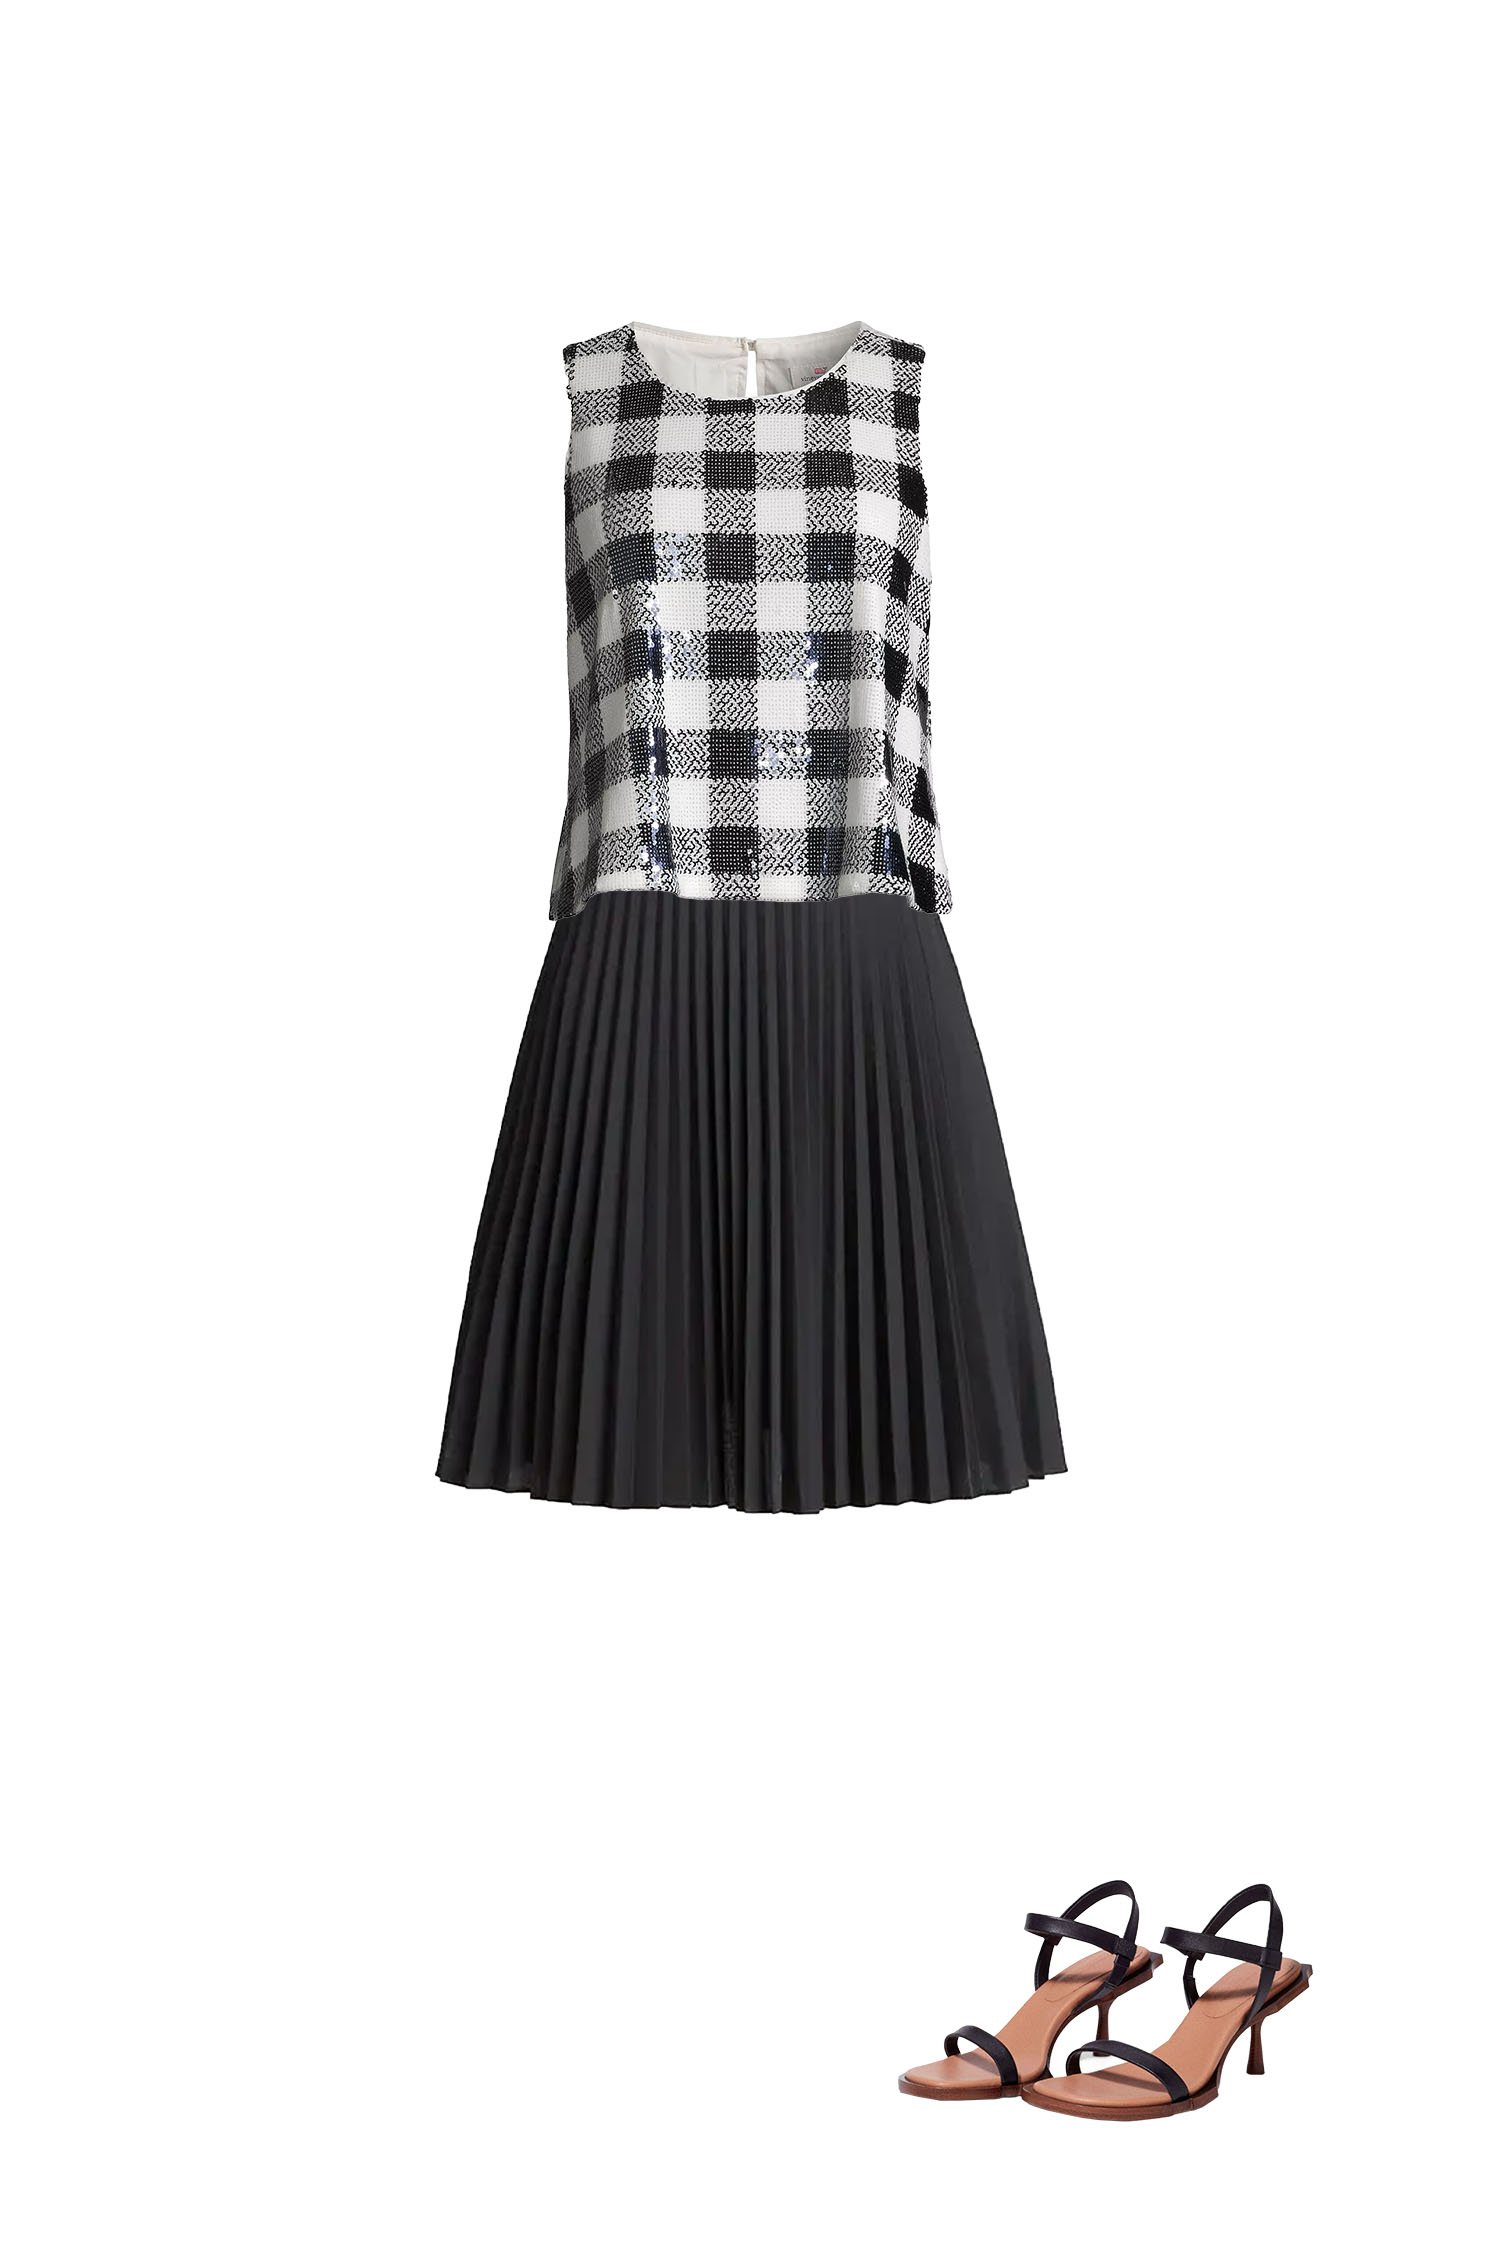 Black Pleated Short Skirt Outfit with White and Black Check Top and Black Heeled Sandals